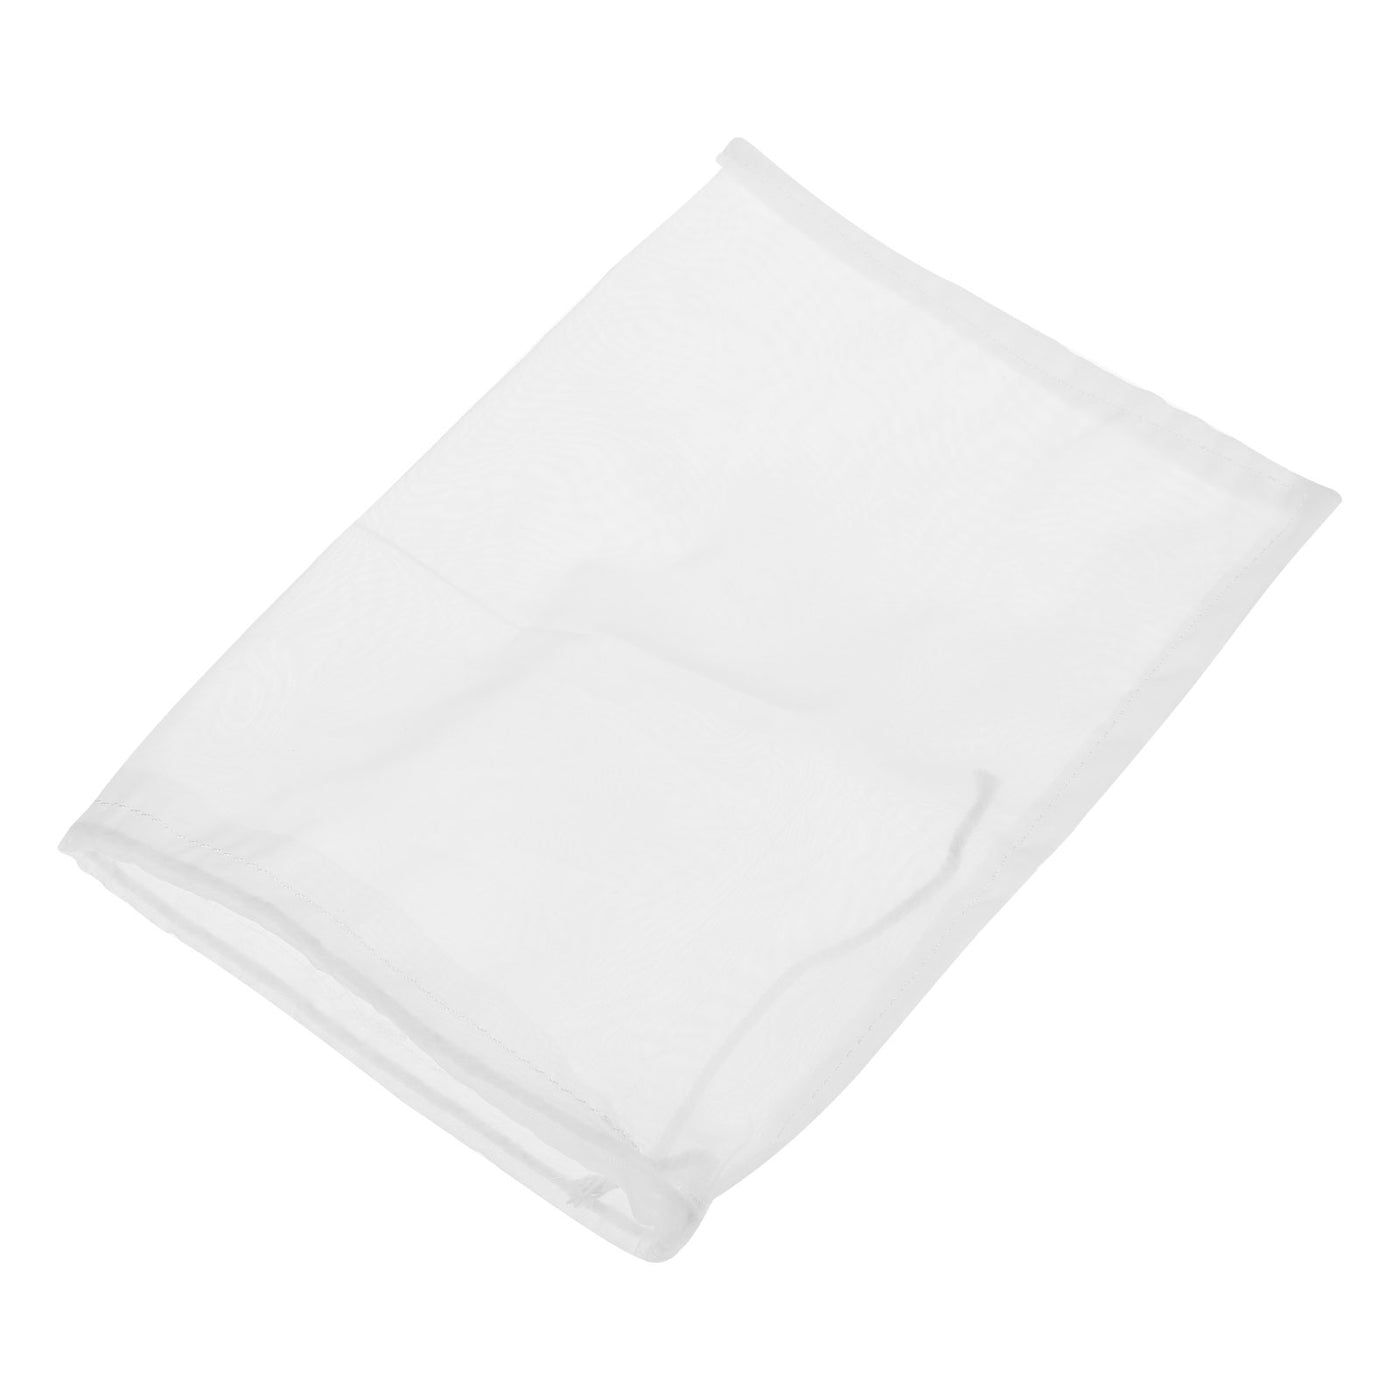 uxcell Uxcell Paint Filter Bag 120 Mesh (7.9"x5.9") Nylon Strainer for Filtering Paint